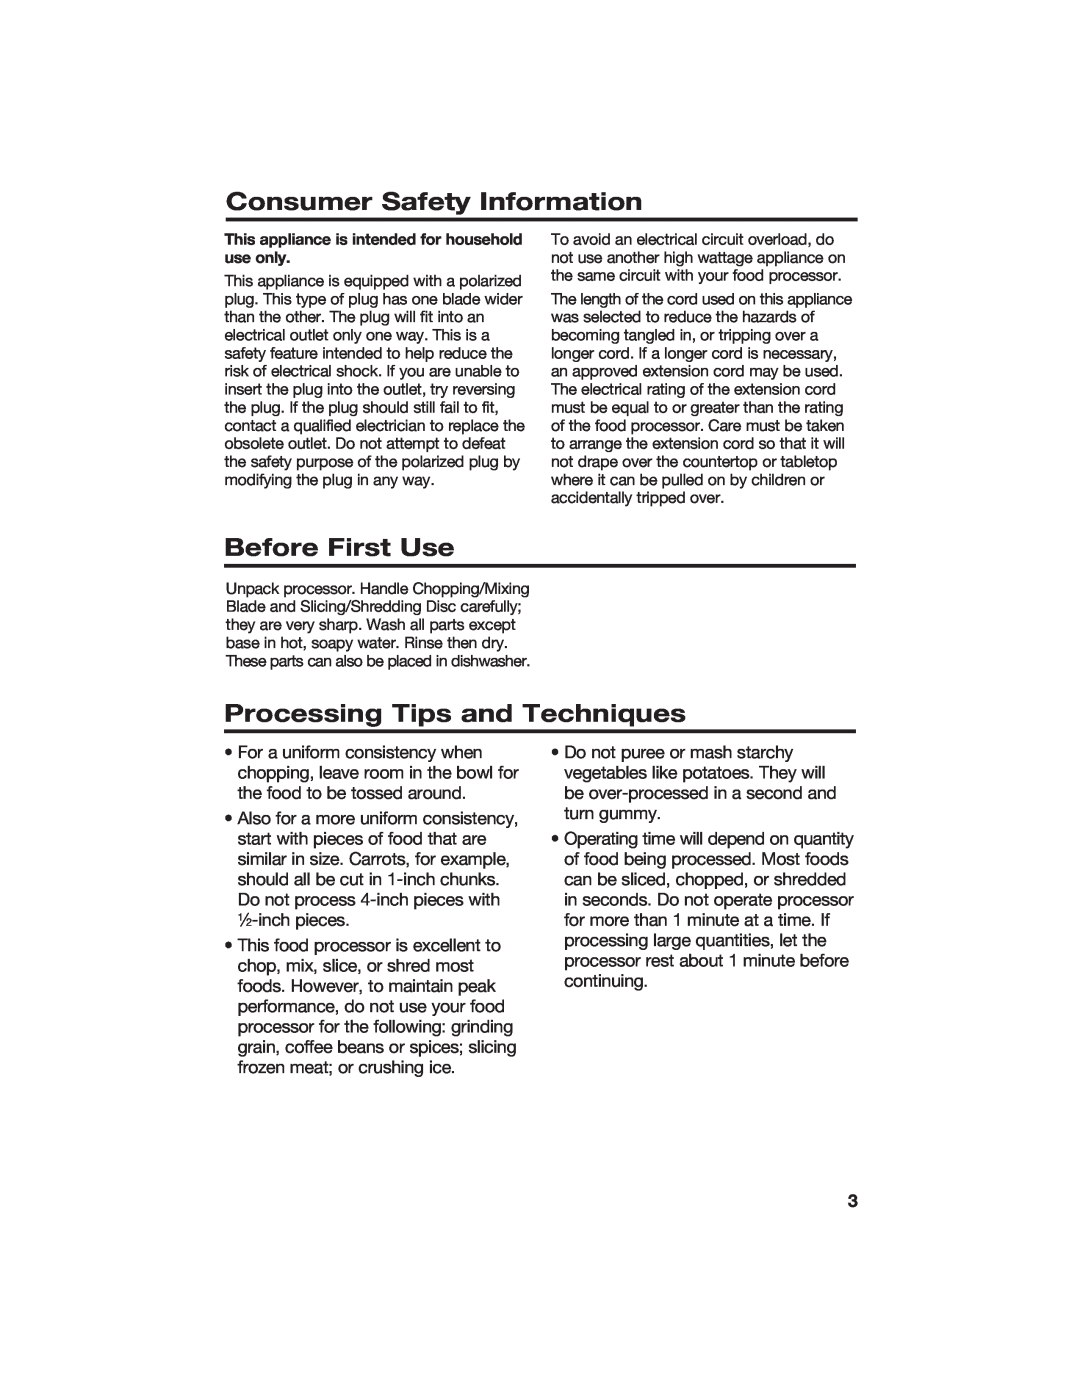 Hamilton Beach 840118100 manual Consumer Safety Information, Before First Use, Processing Tips and Techniques 